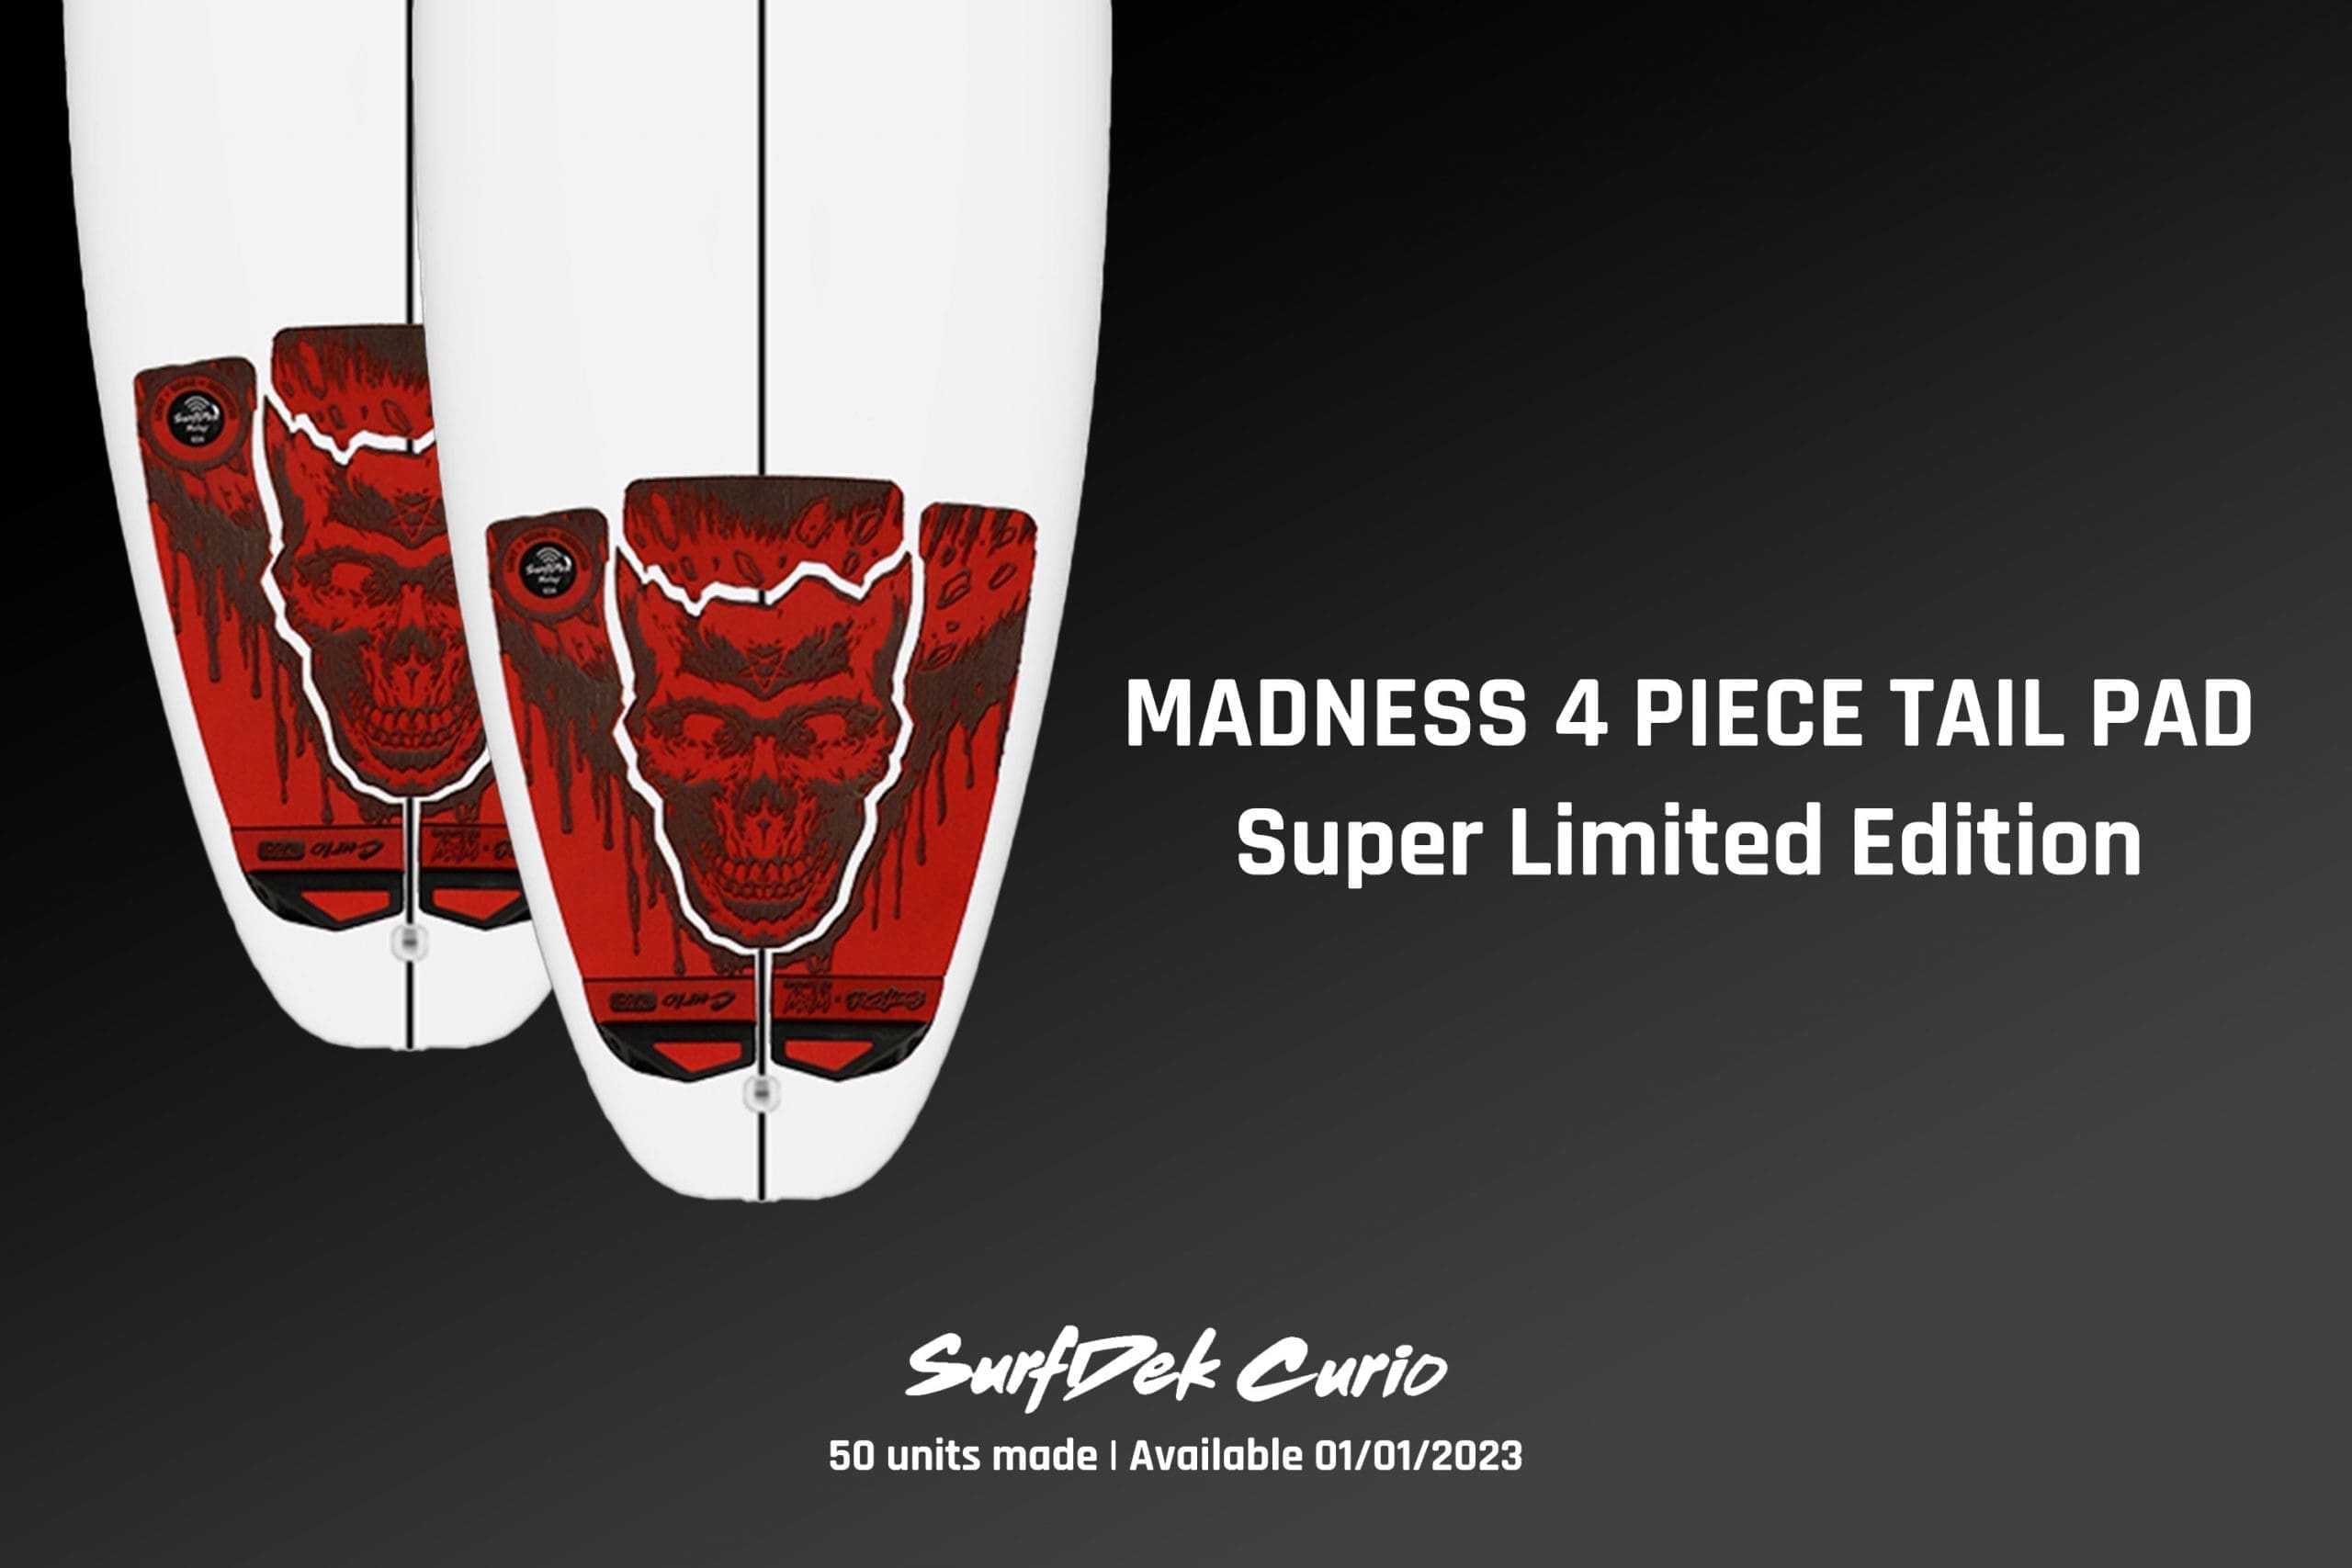 Madness Tail Pad Giveaway!